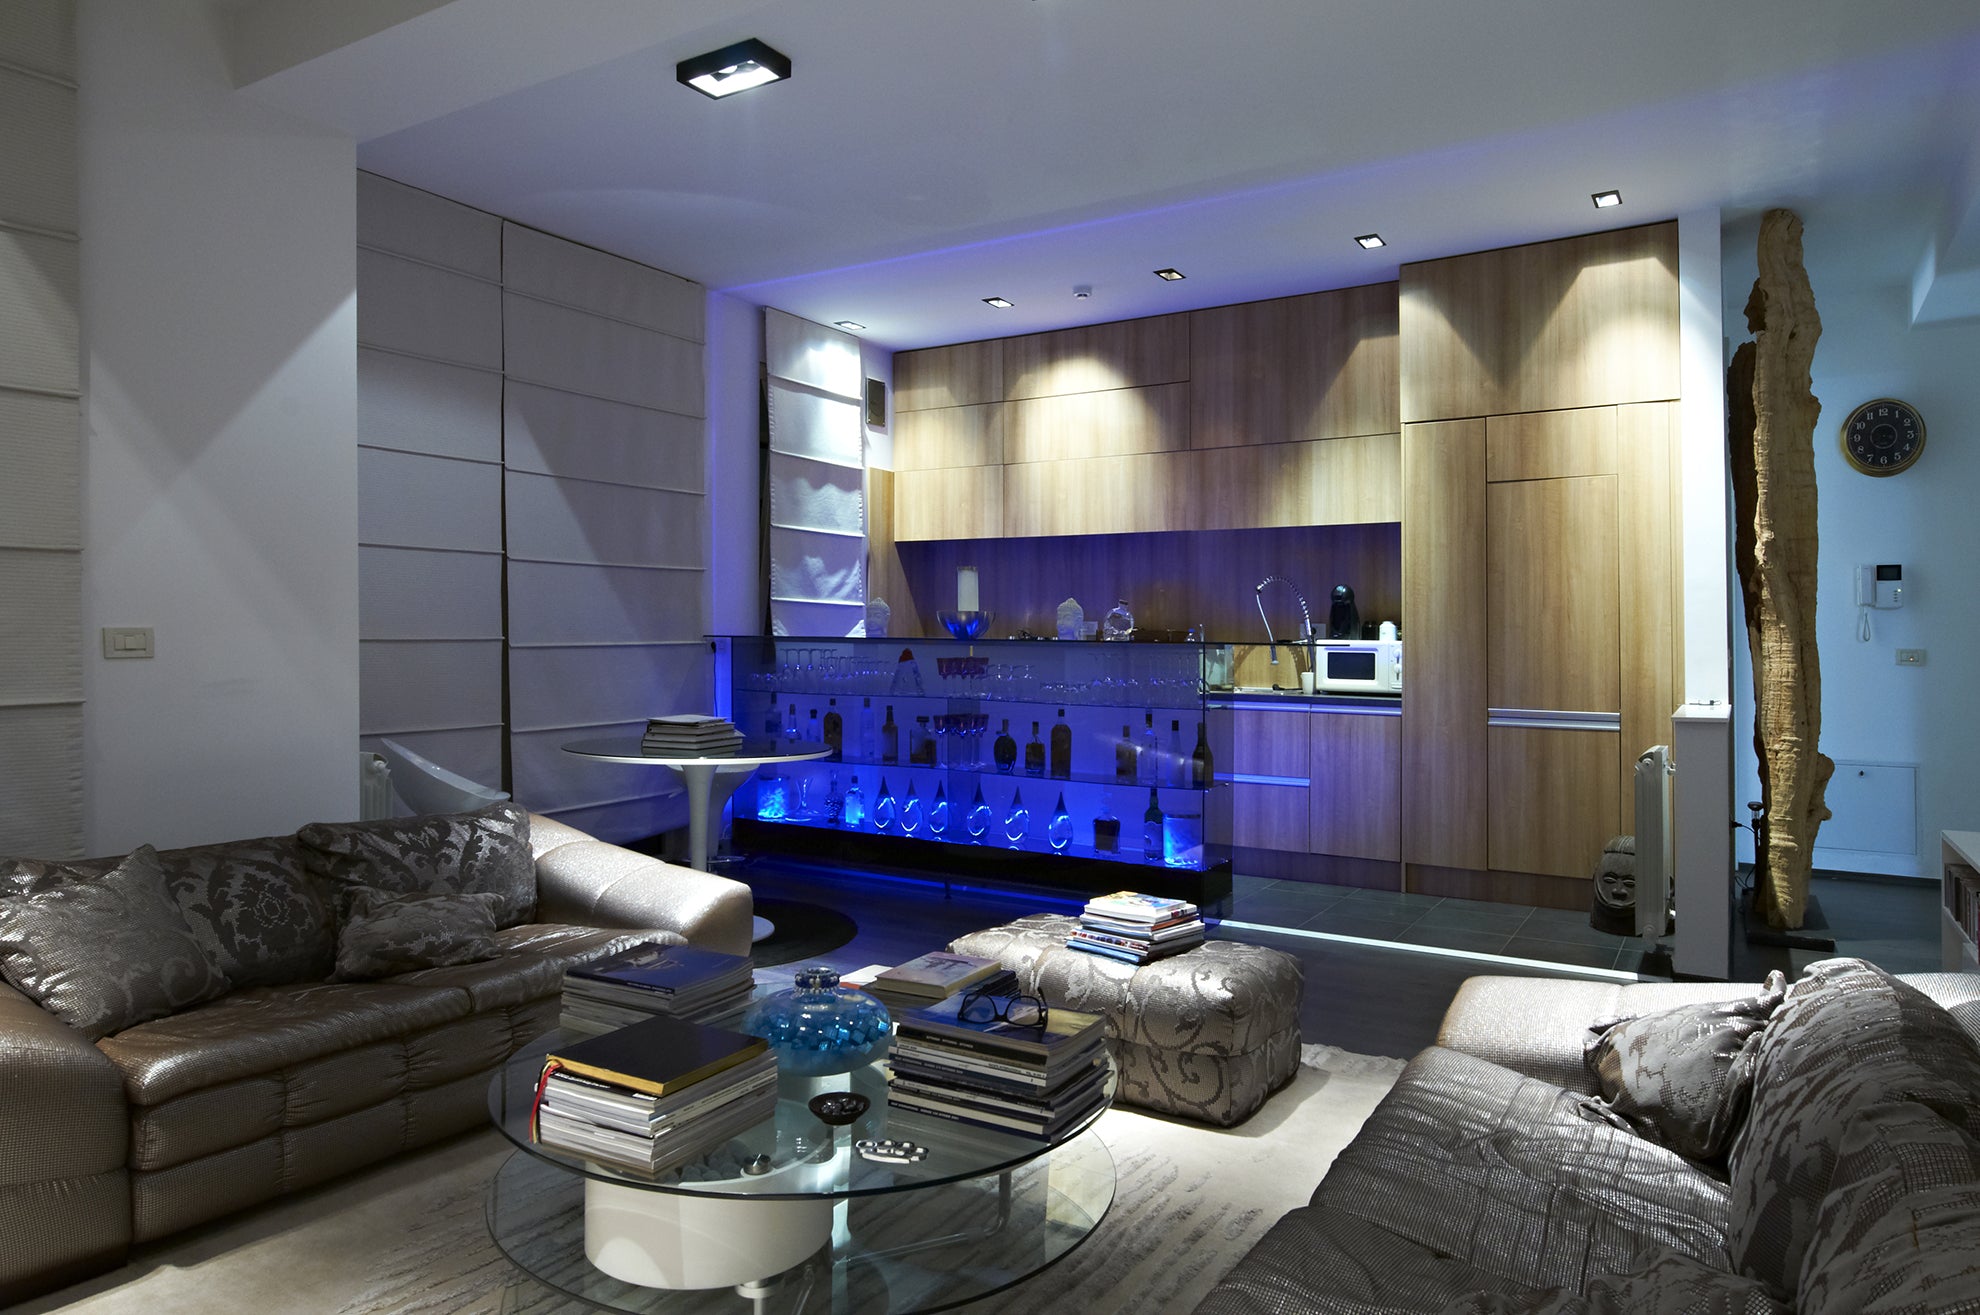 Economical Tips For Combining Different Types Of Light Sources In A Room